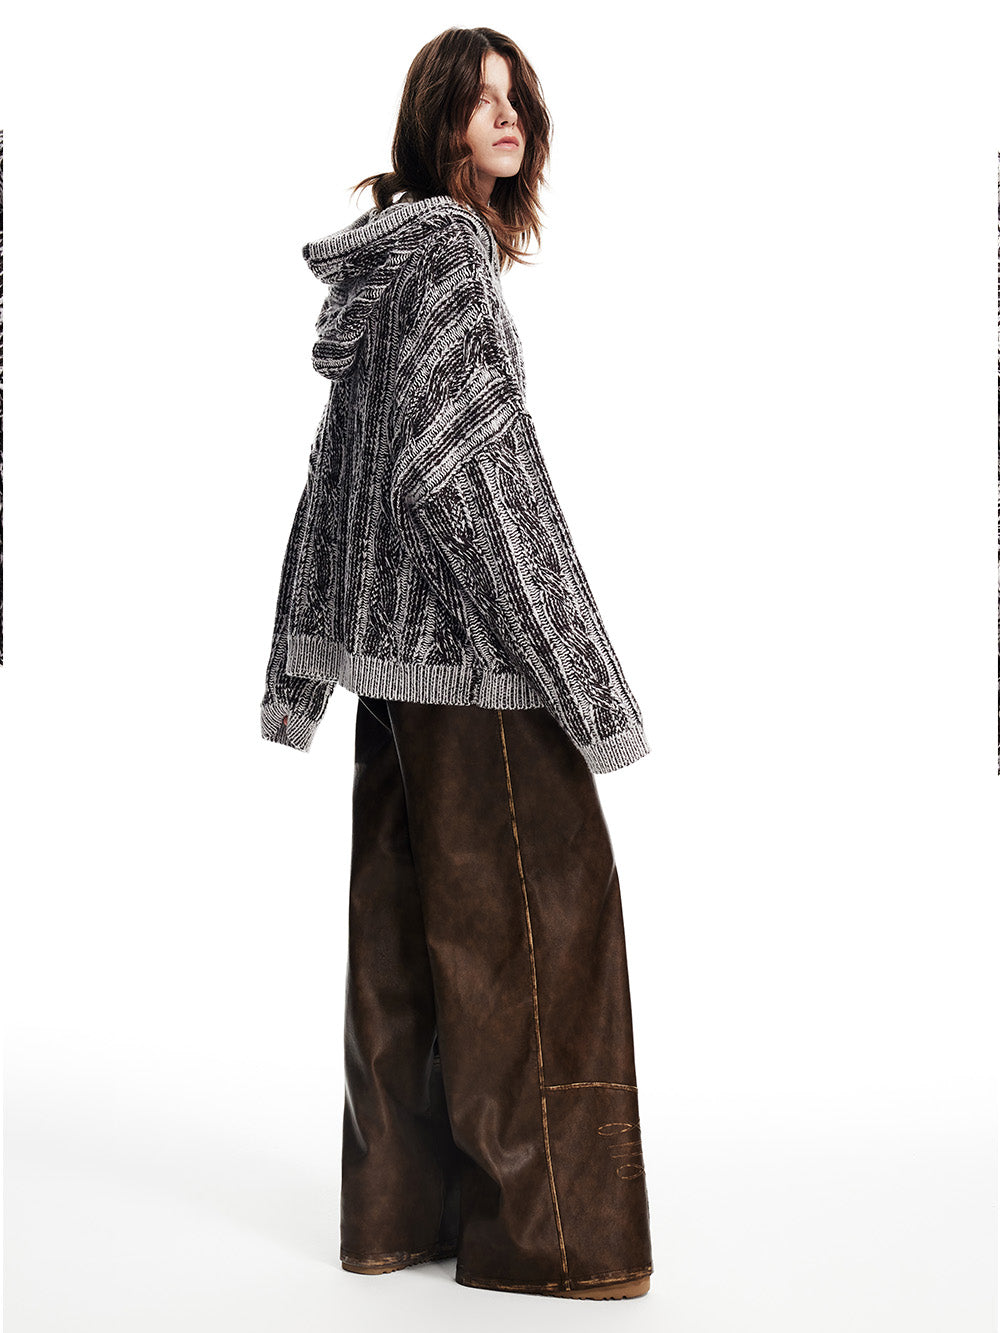 MUKTANK x WESAME Winter and Autumn Oversize Hooded Thick Knited Cardigan